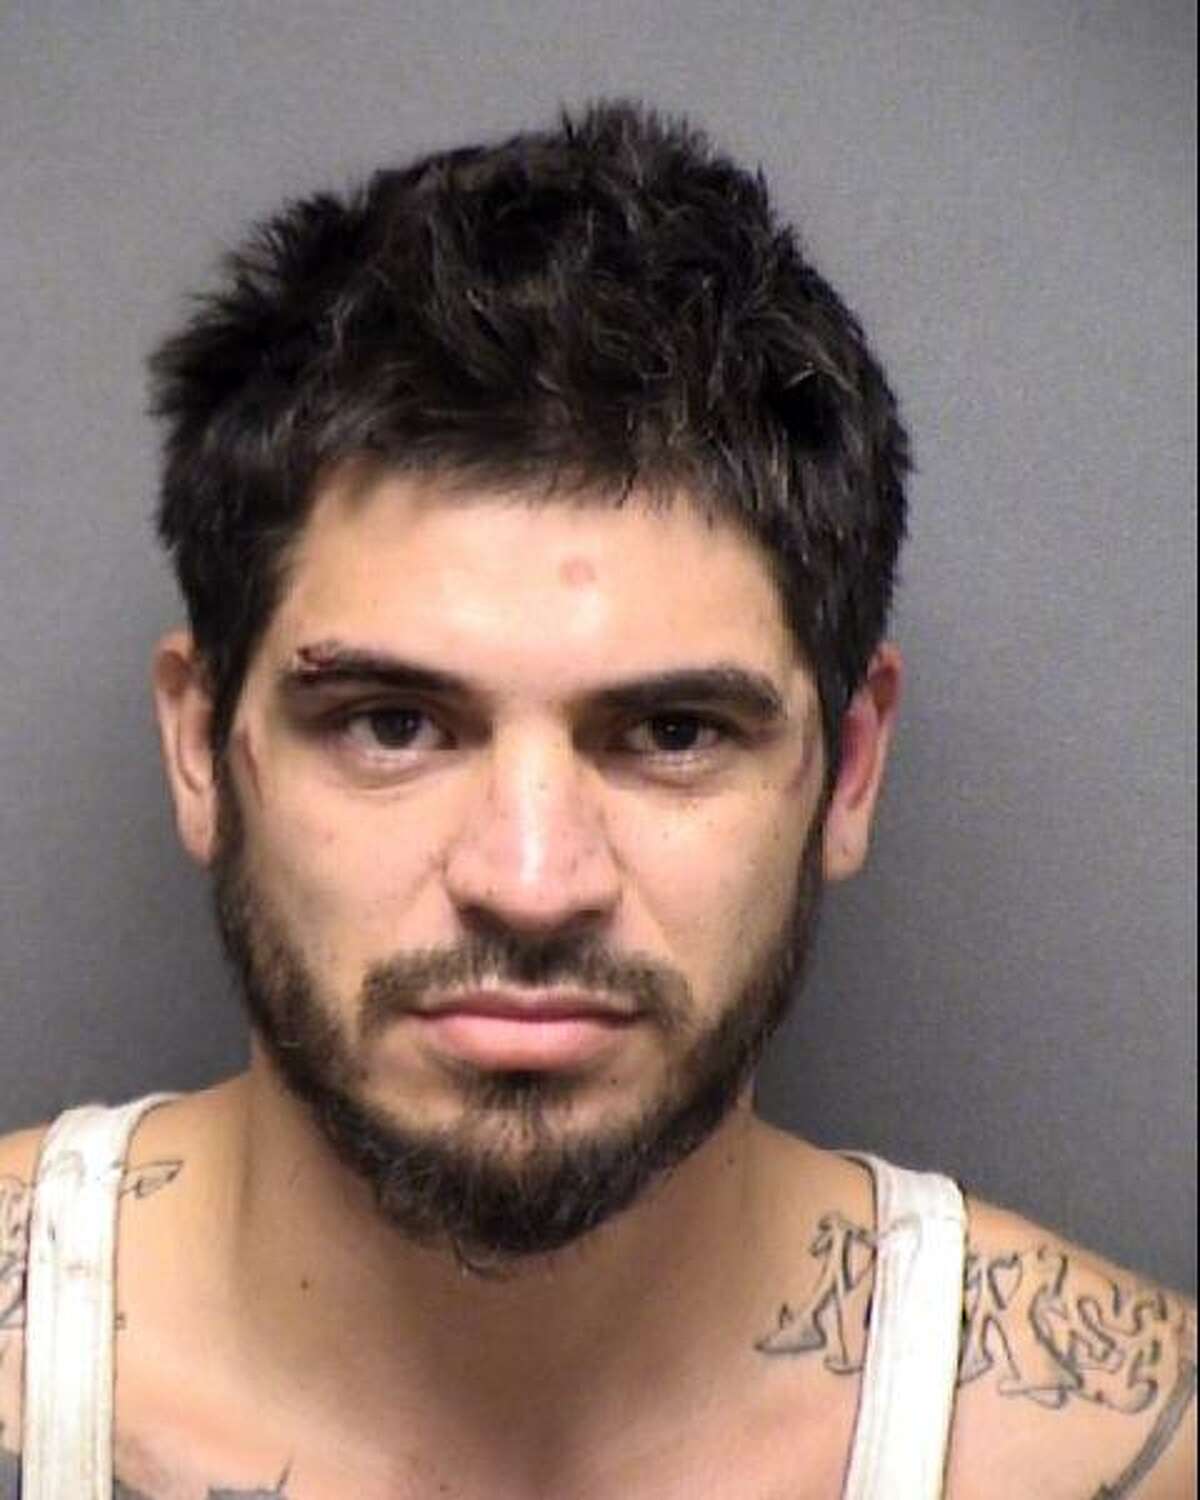 Hilario Gabriel Urista has been indicted for attempted capital murder of a police officer.